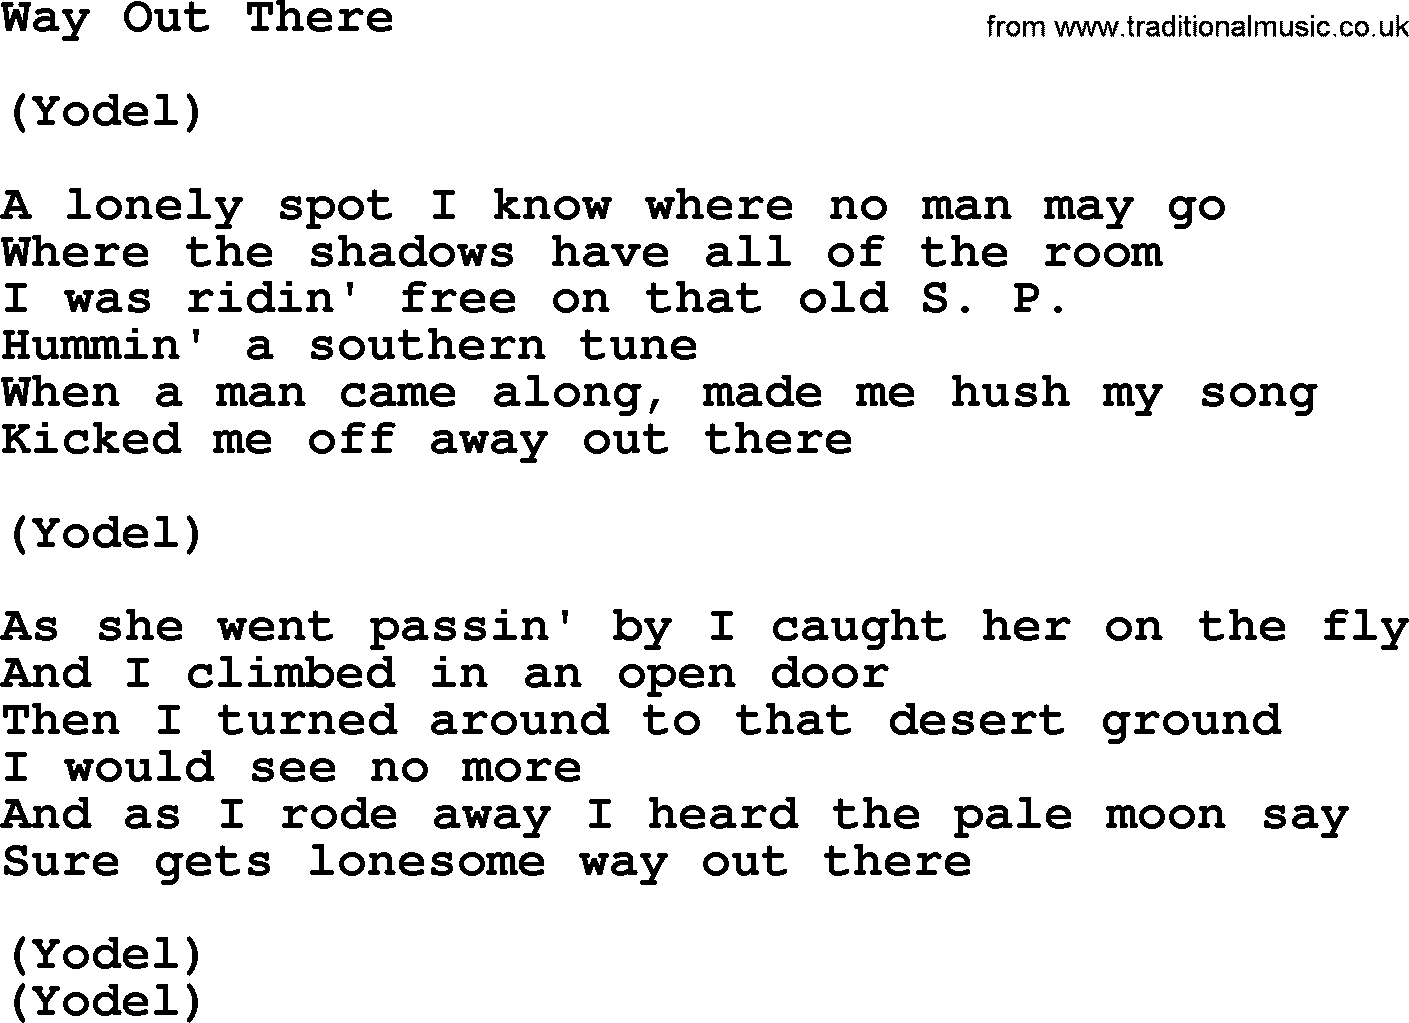 Marty Robbins song: Way Out There, lyrics